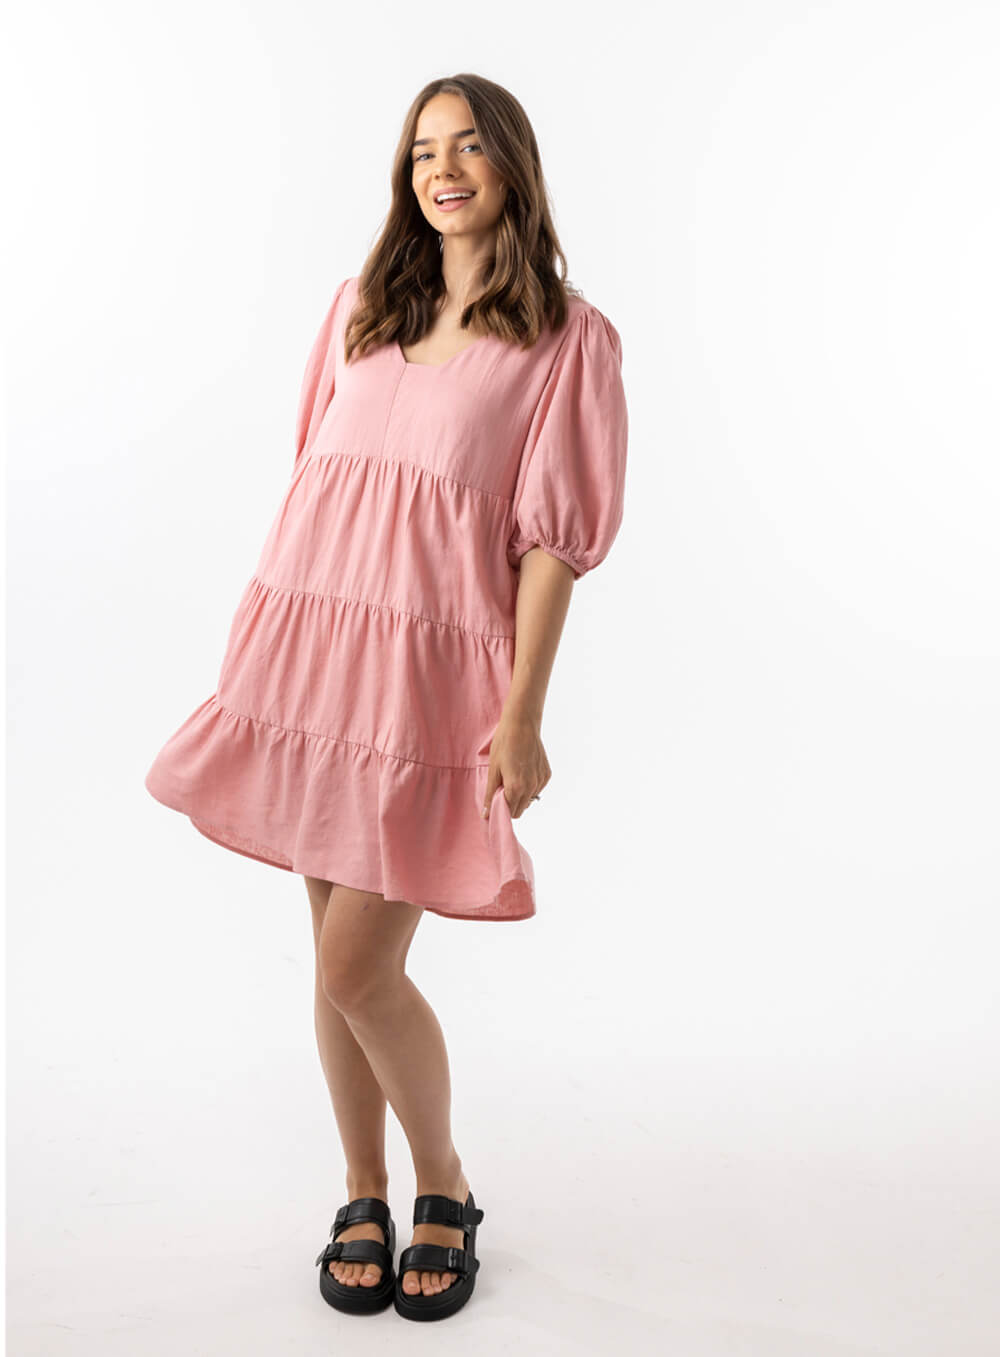 The Eleanor mini dress in blush pink features a flowing layered a line shape with draping linen/viscose fabric, puff 3/4 sleeves with elastic cuff which can be pushed up to the elbow, a dropped v shape neckline with a square finish.